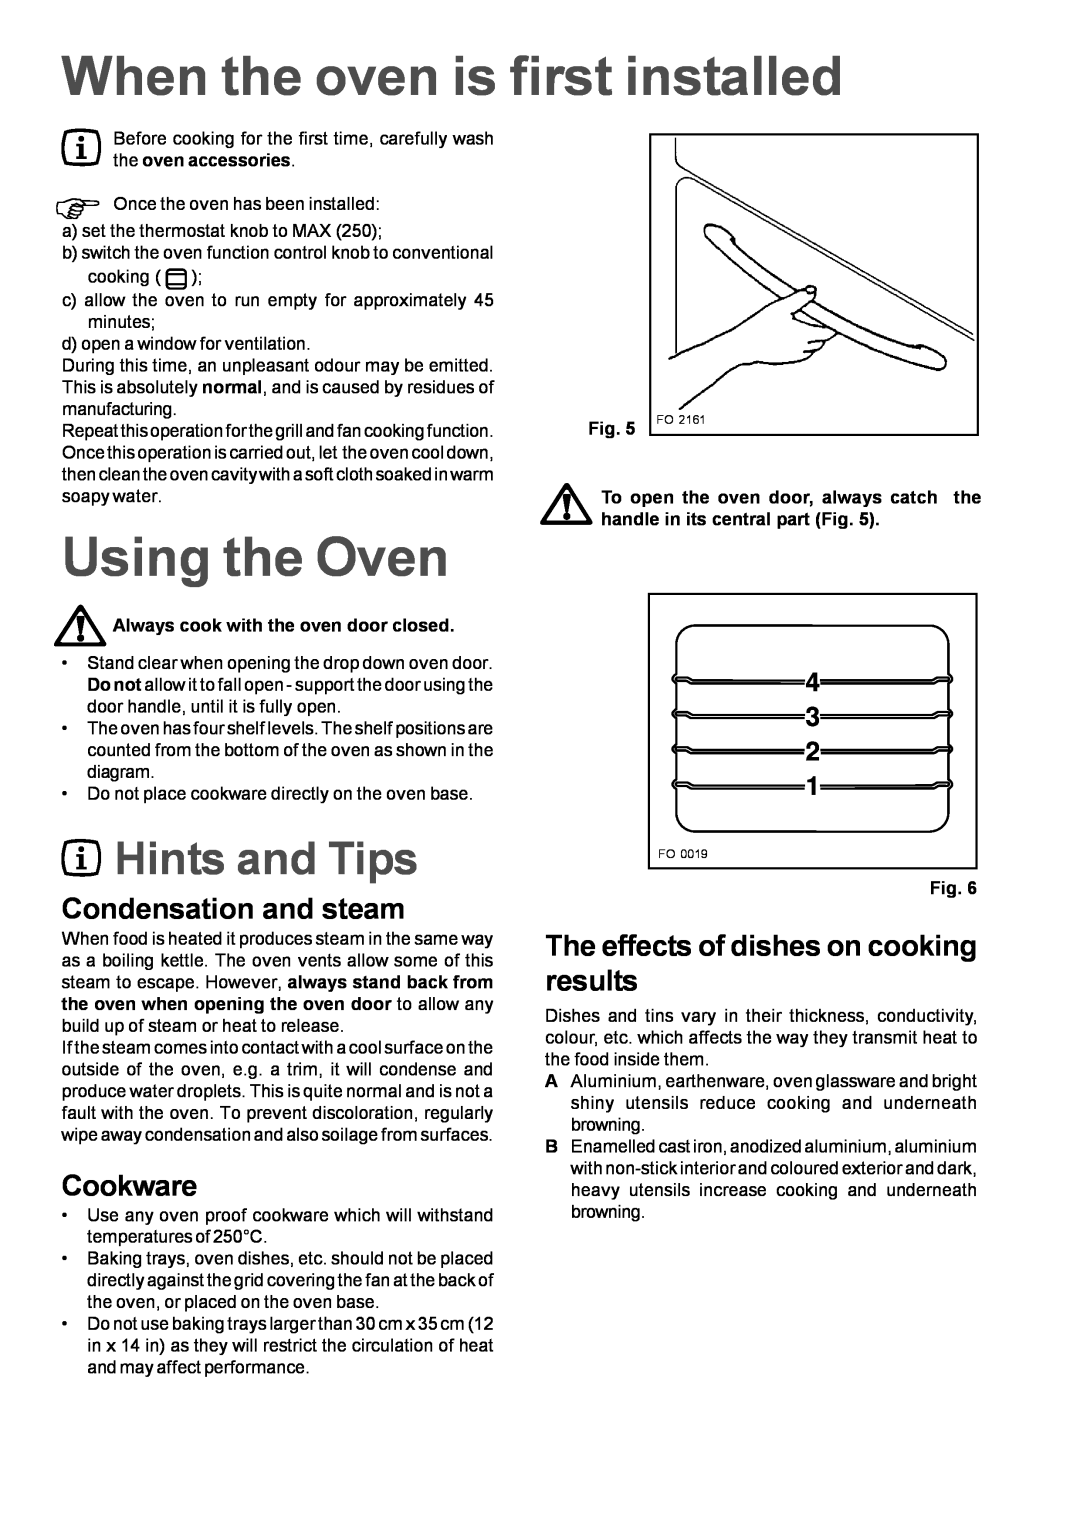 Zanussi ZBF 610 manual When the oven is first installed, Using the Oven, Condensation and steam, Cookware, Hints and Tips 